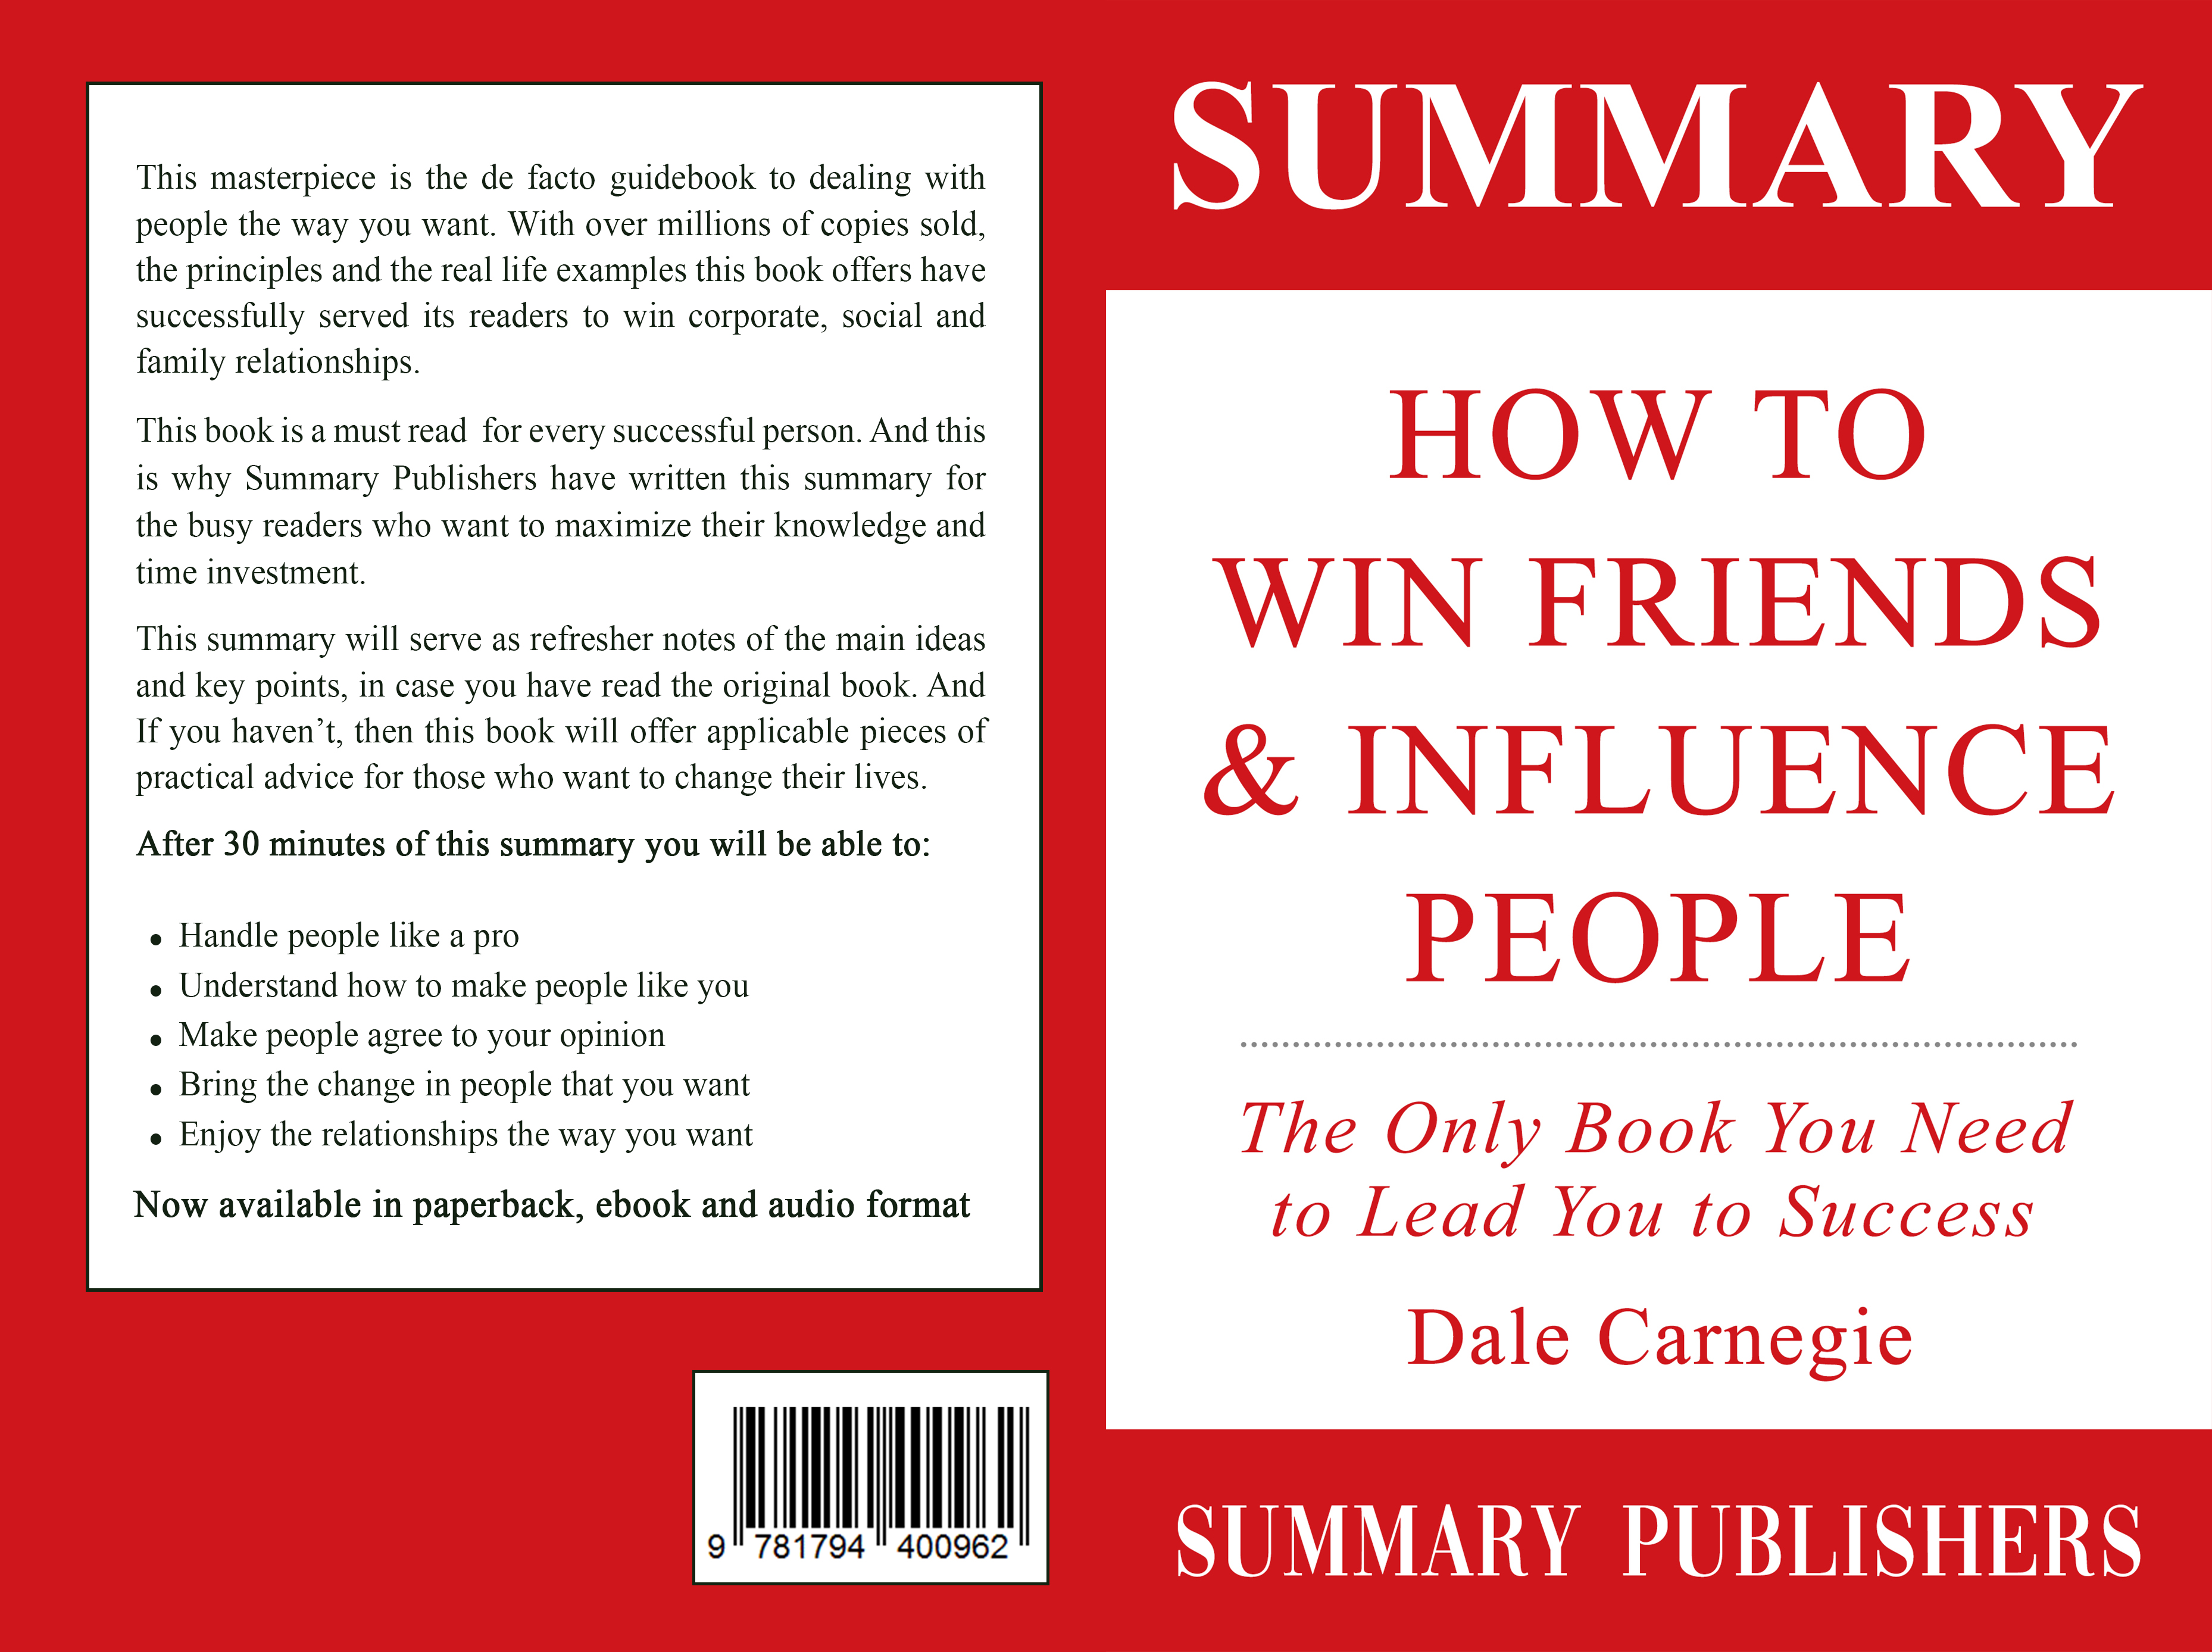 FREE: Summary of how to win friends and influence people by Dale Carnegie by Summary Publishers